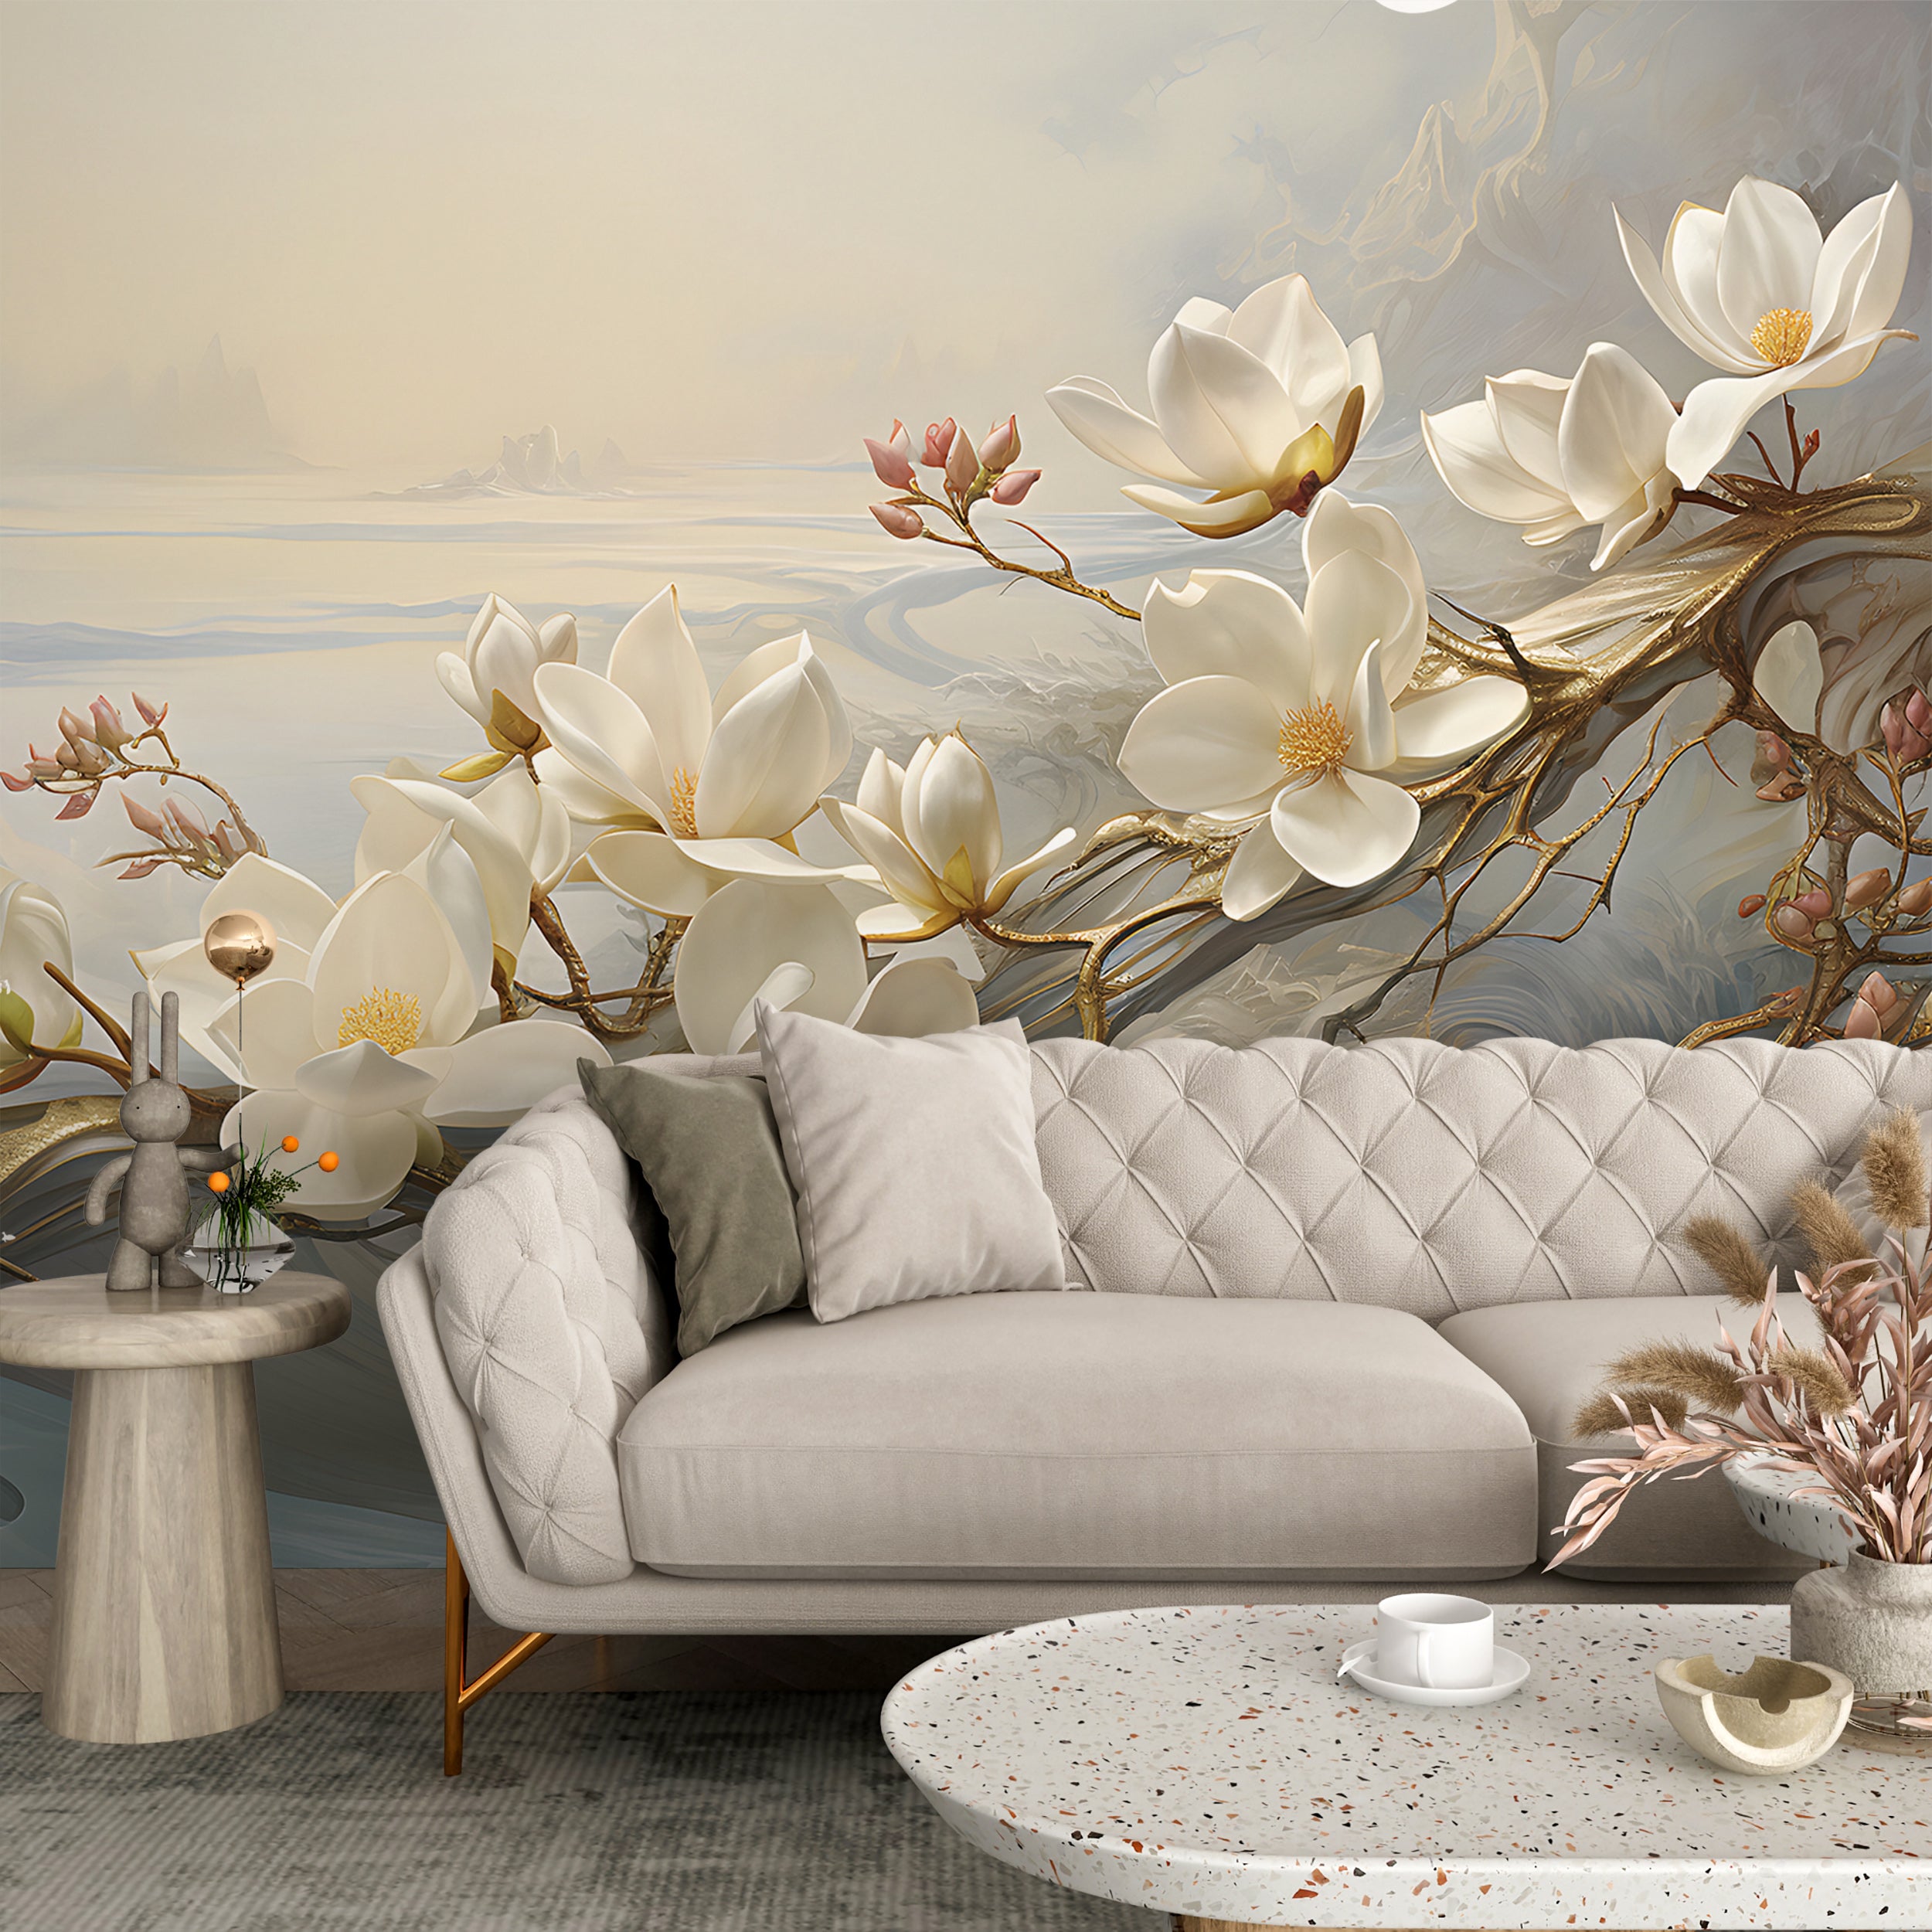 Botanical Wallpaper with Magnolia Blooms